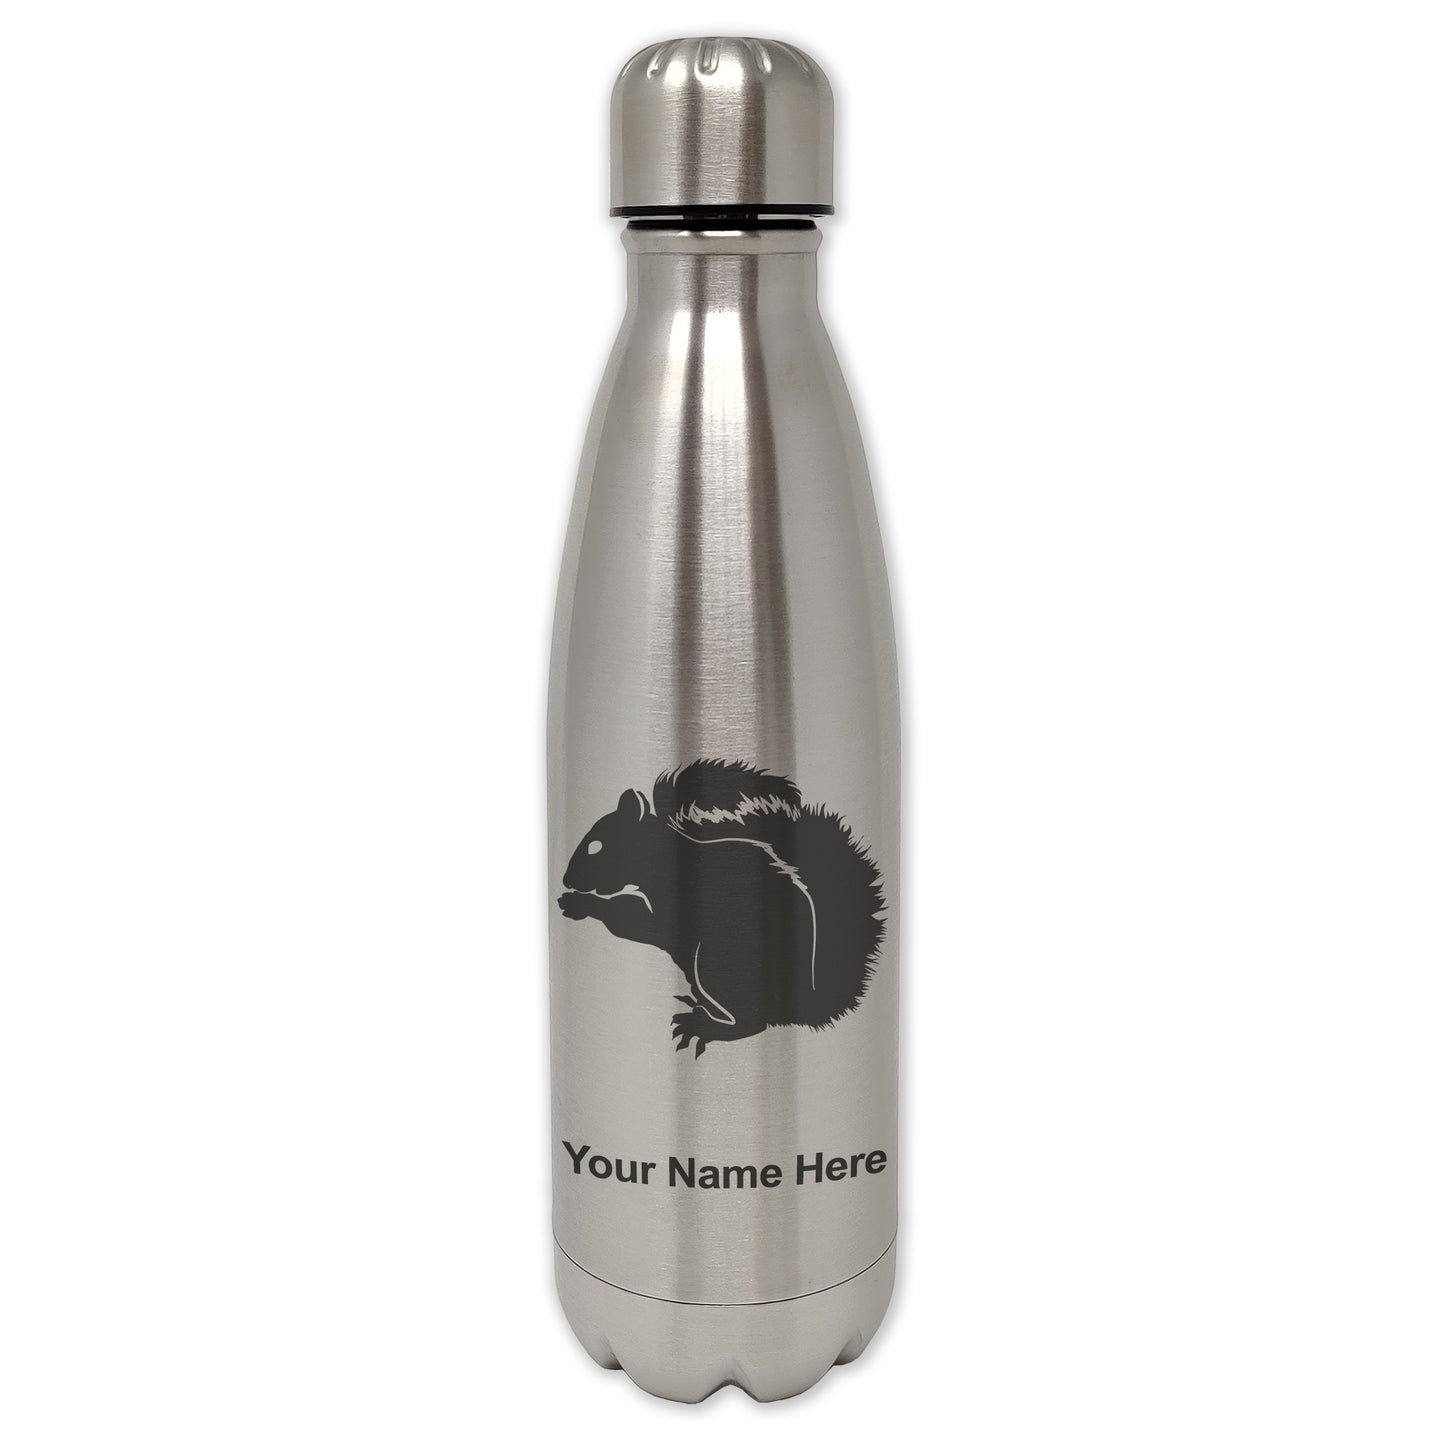 LaserGram Single Wall Water Bottle, Squirrel, Personalized Engraving Included